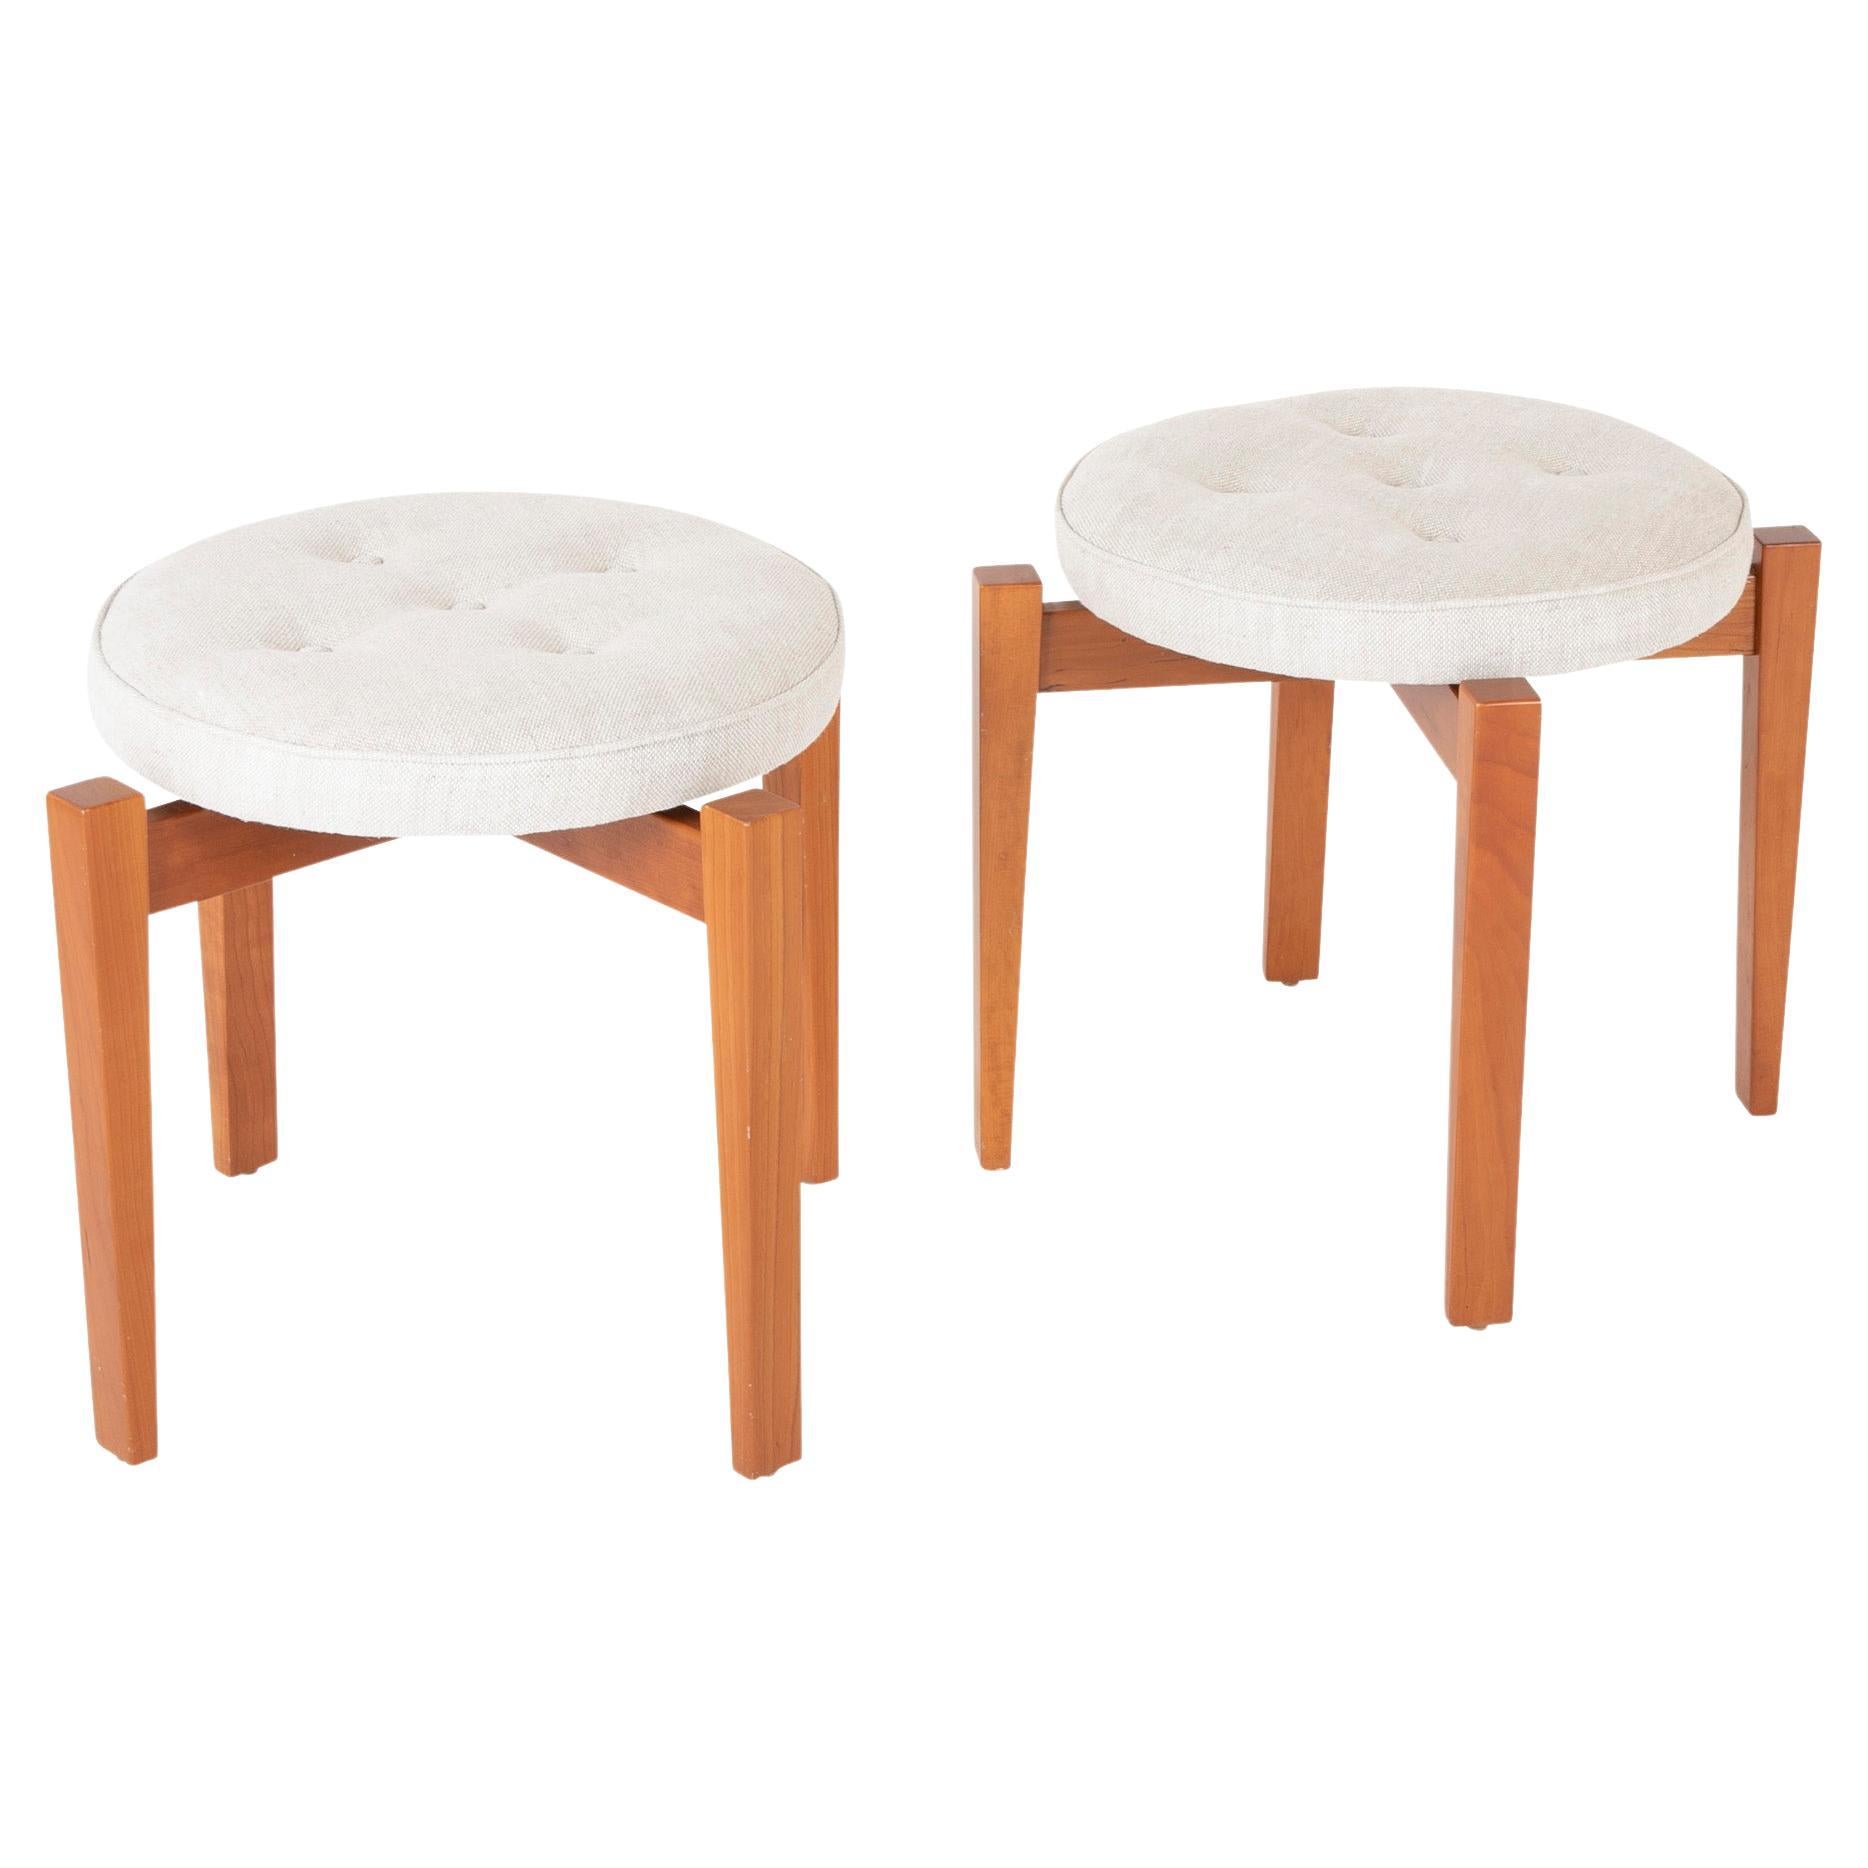 Pair of Jens Risom for Pucci Stools